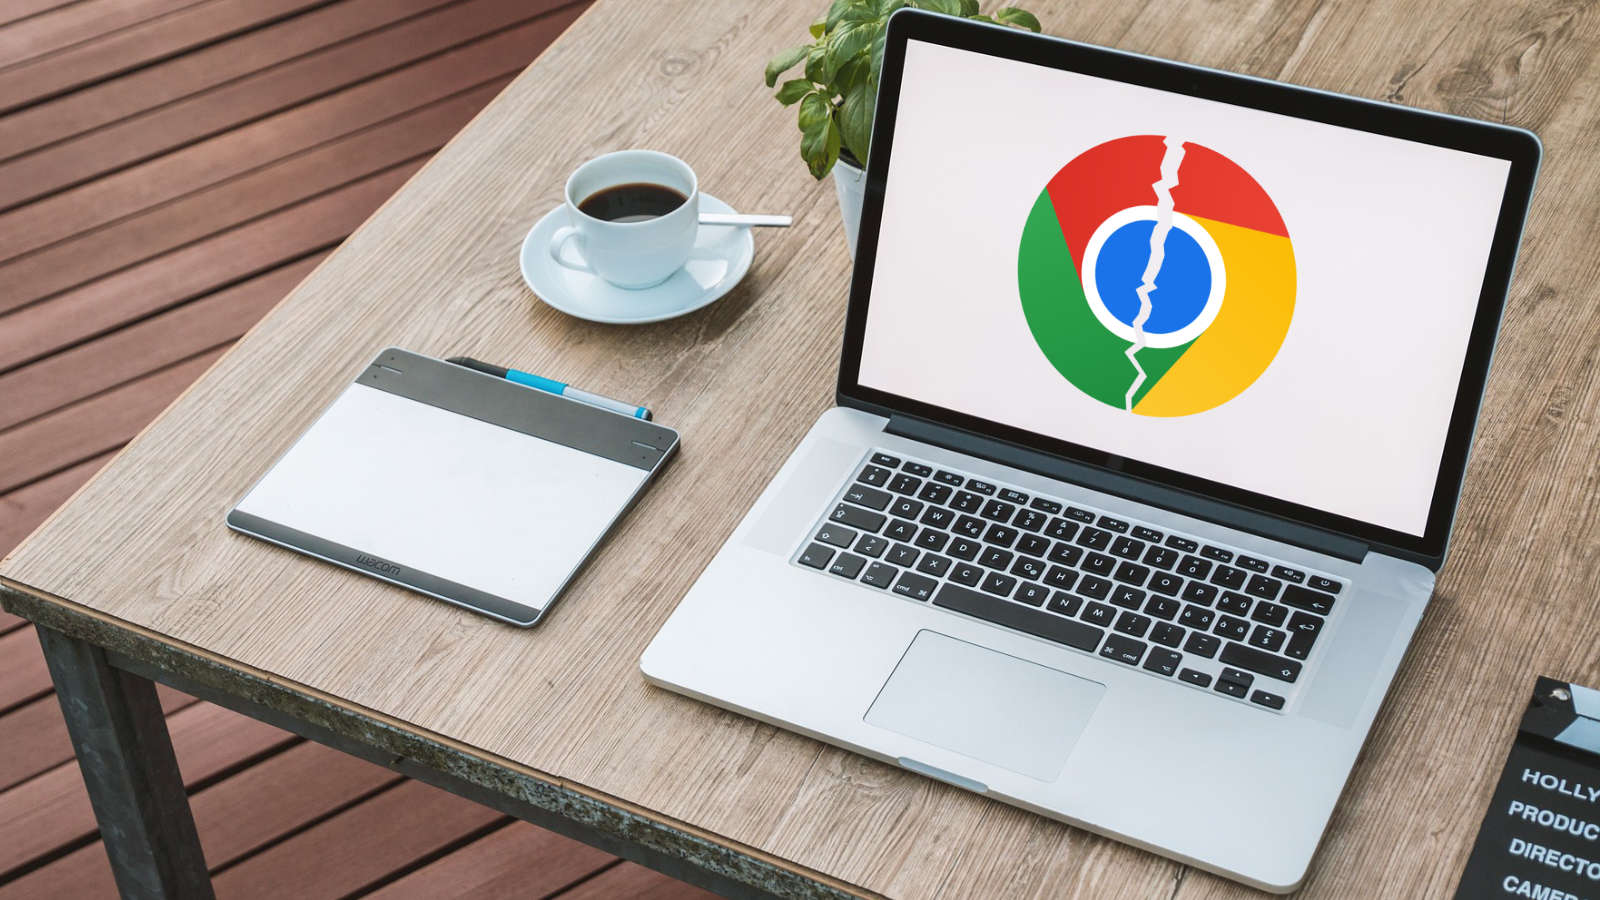 Stay Secure: Ensure Your Google Chrome Browser is Up to Date